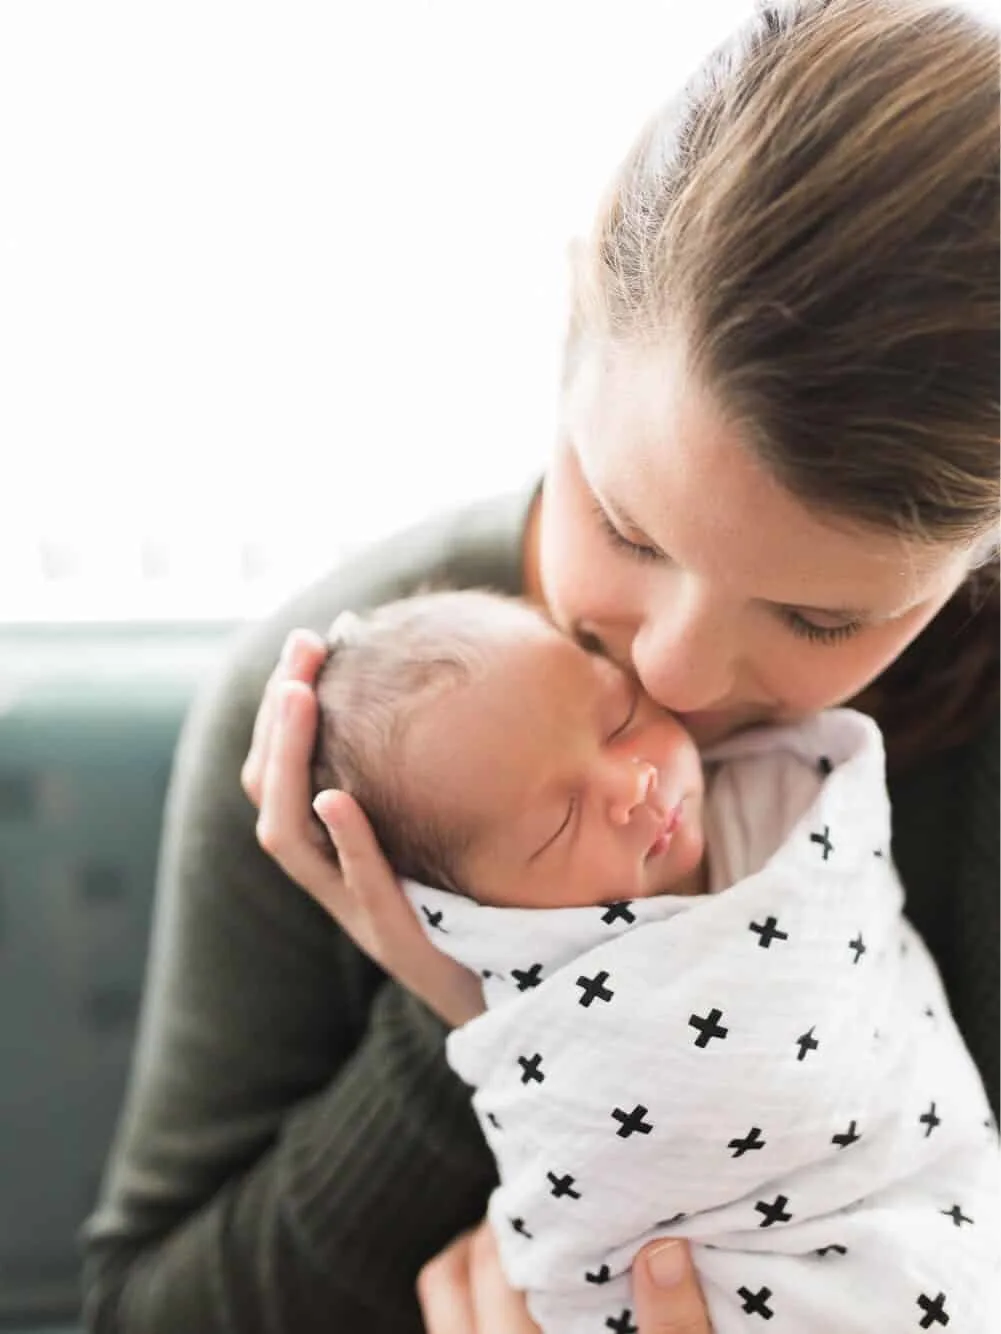 Know a woman who has a new baby and you don't know what to do to help? There are so many ways you can help a mom with a newborn, these will get you started.